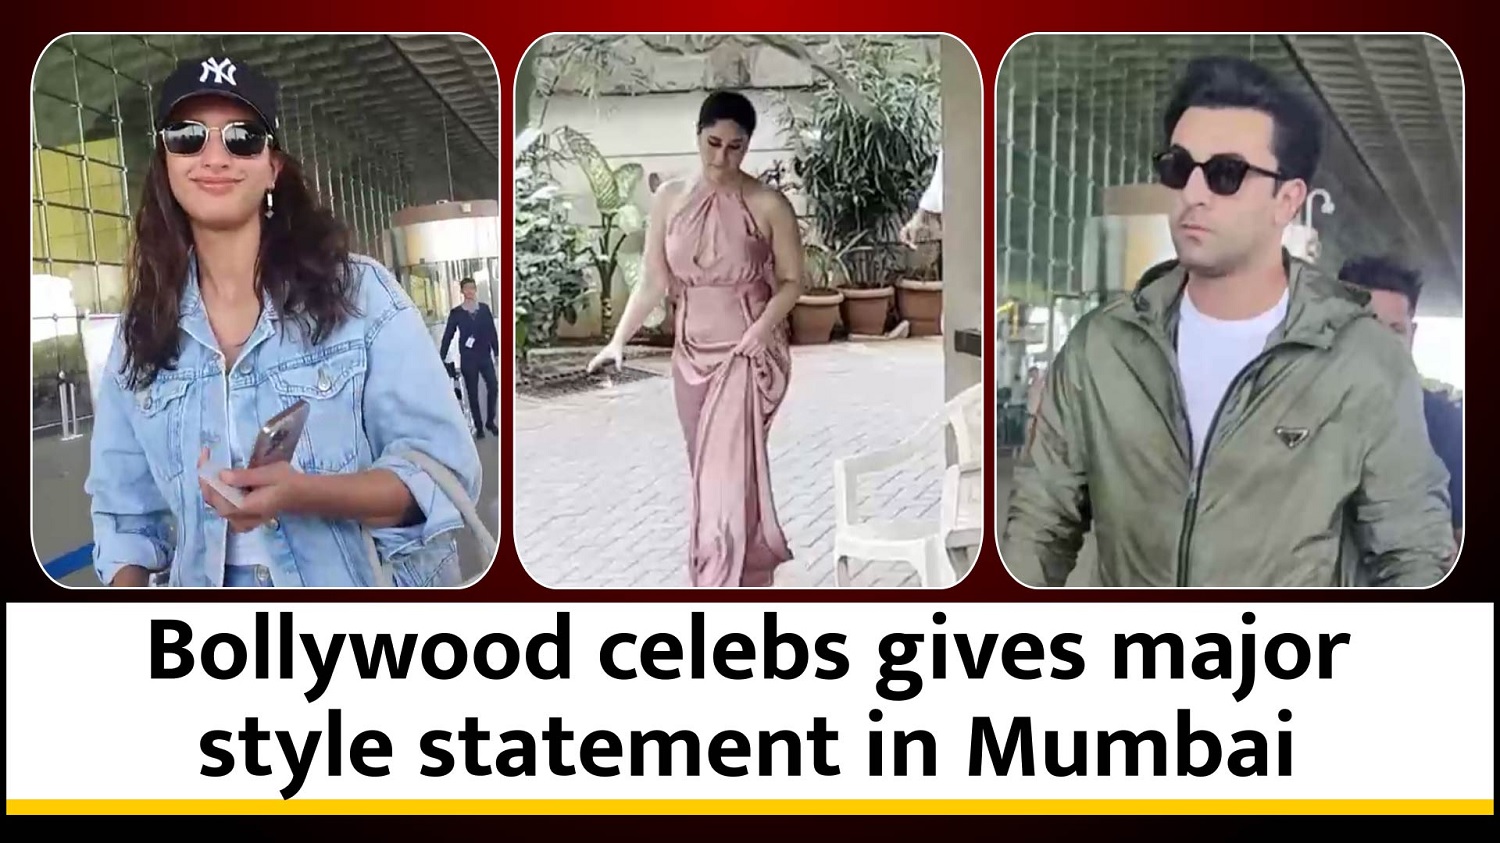 Bollywood celebs gives major style statement in Mumbai